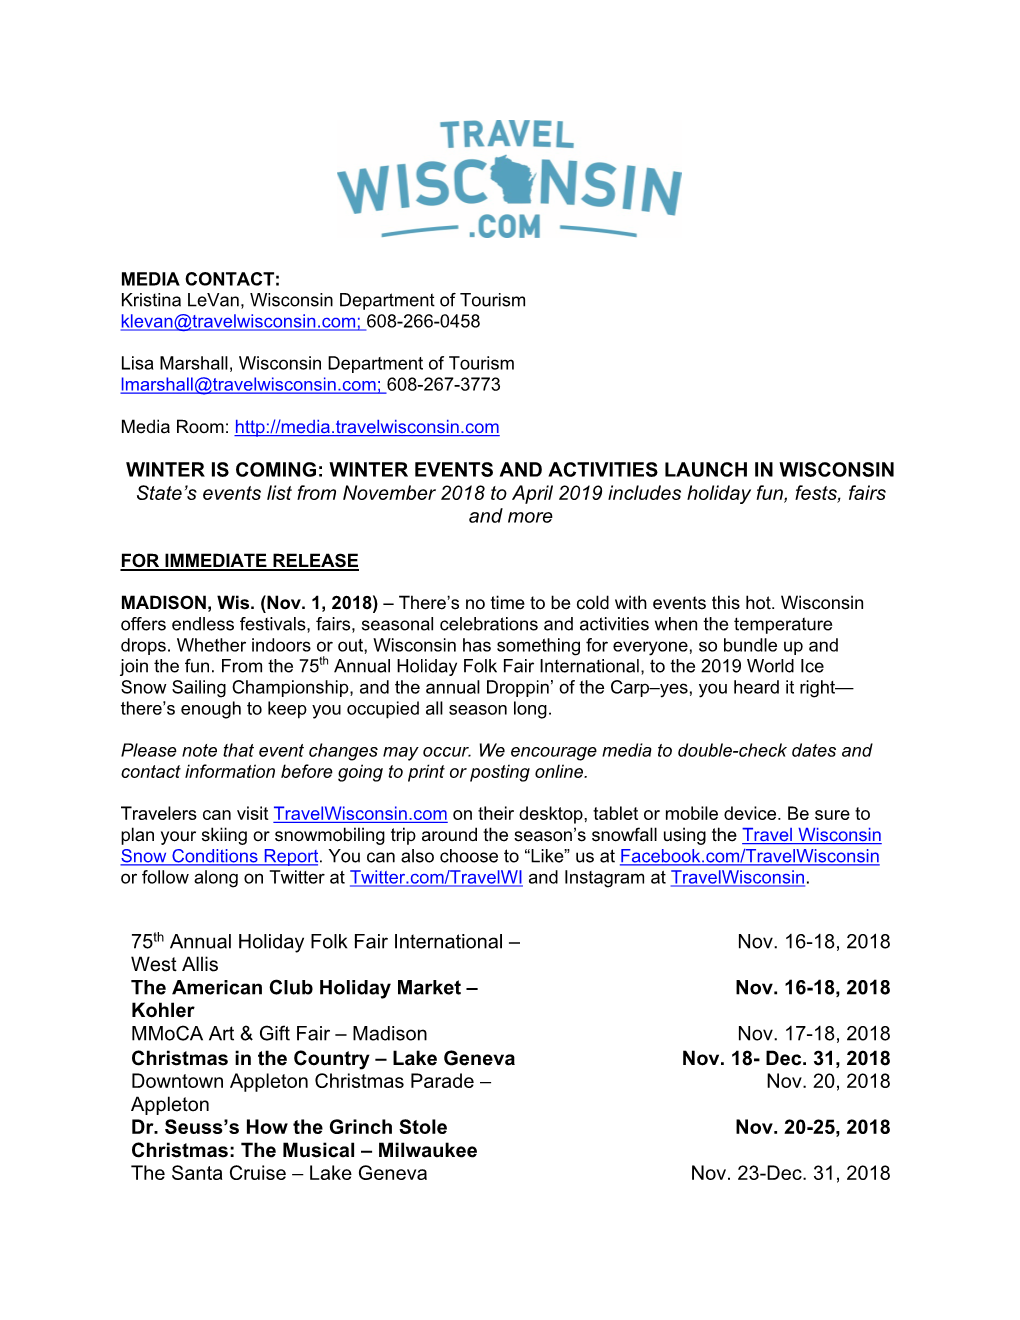 WINTER EVENTS and ACTIVITIES LAUNCH in WISCONSIN State’S Events List from November 2018 to April 2019 Includes Holiday Fun, Fests, Fairs and More